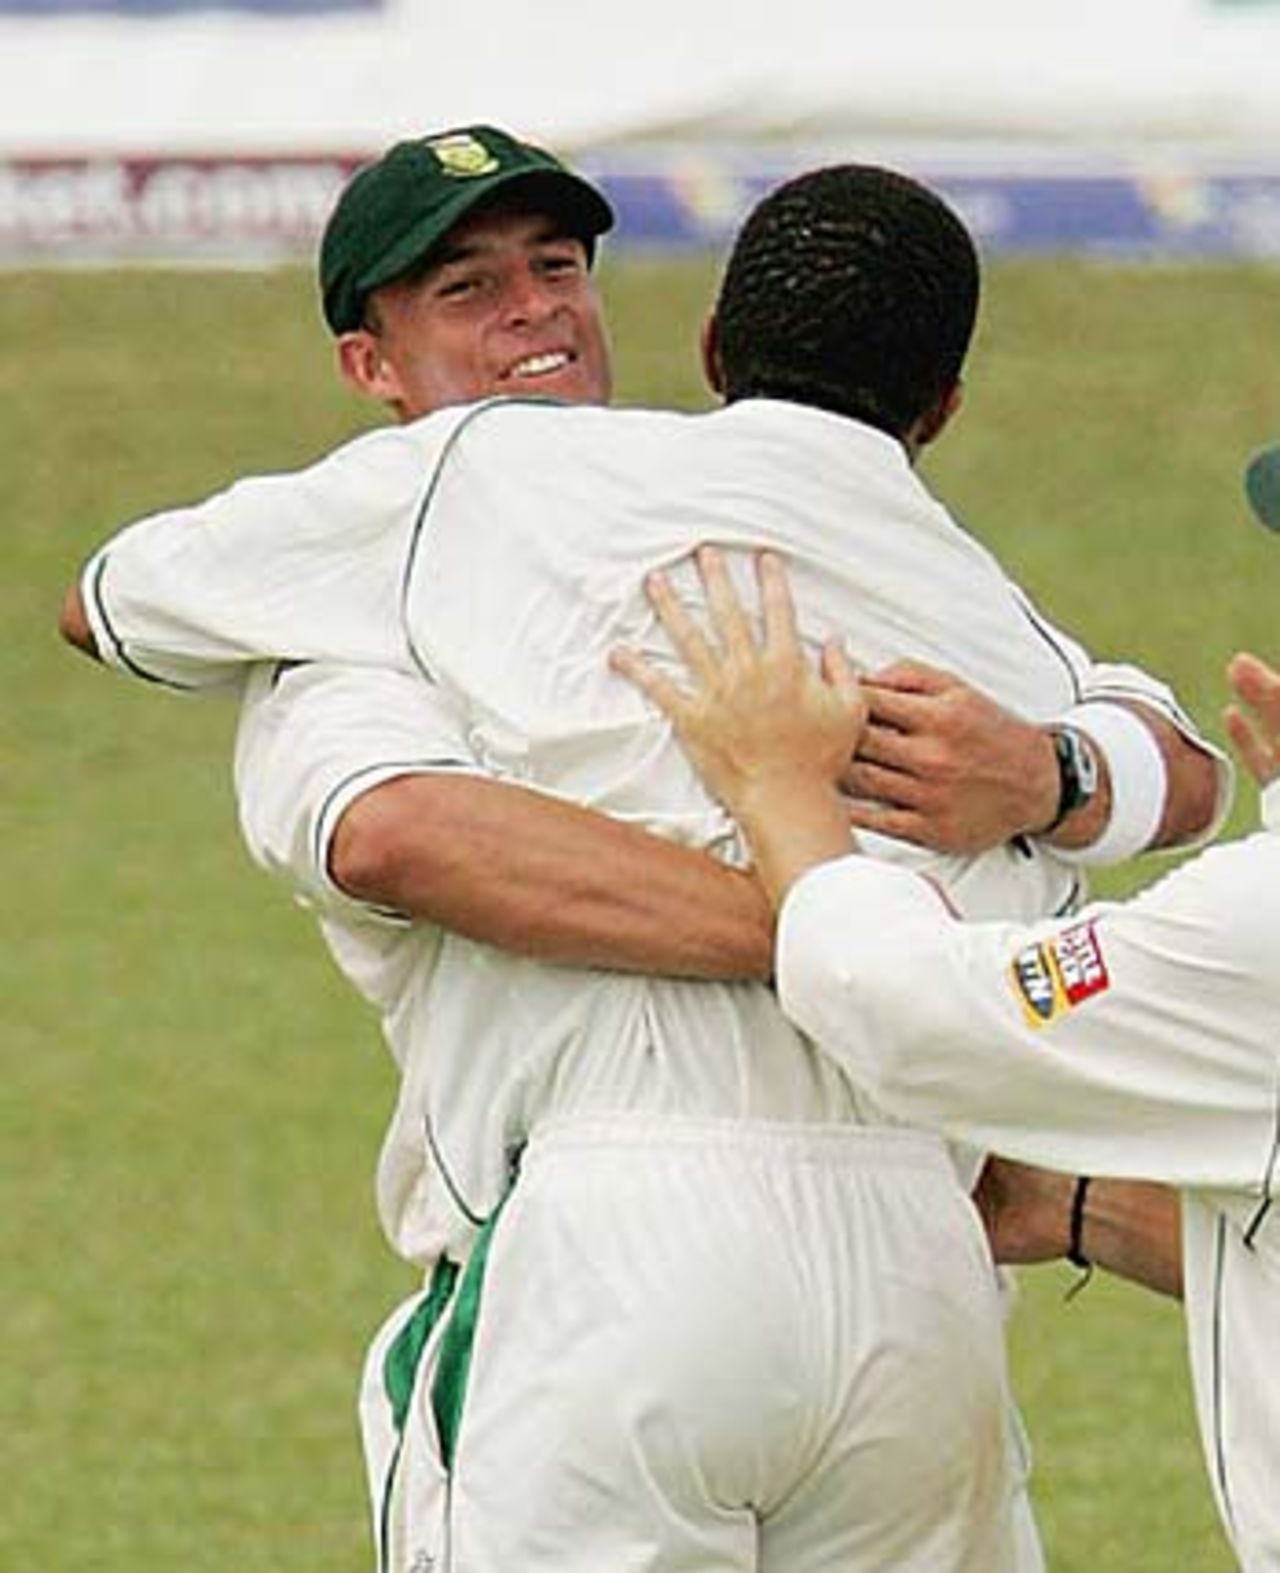 Andre Nel and Makhaya Ntini celebrate Ntini's early double strike, West Indies v South Africa, Trinidad, 2nd Test, April 8, 2005